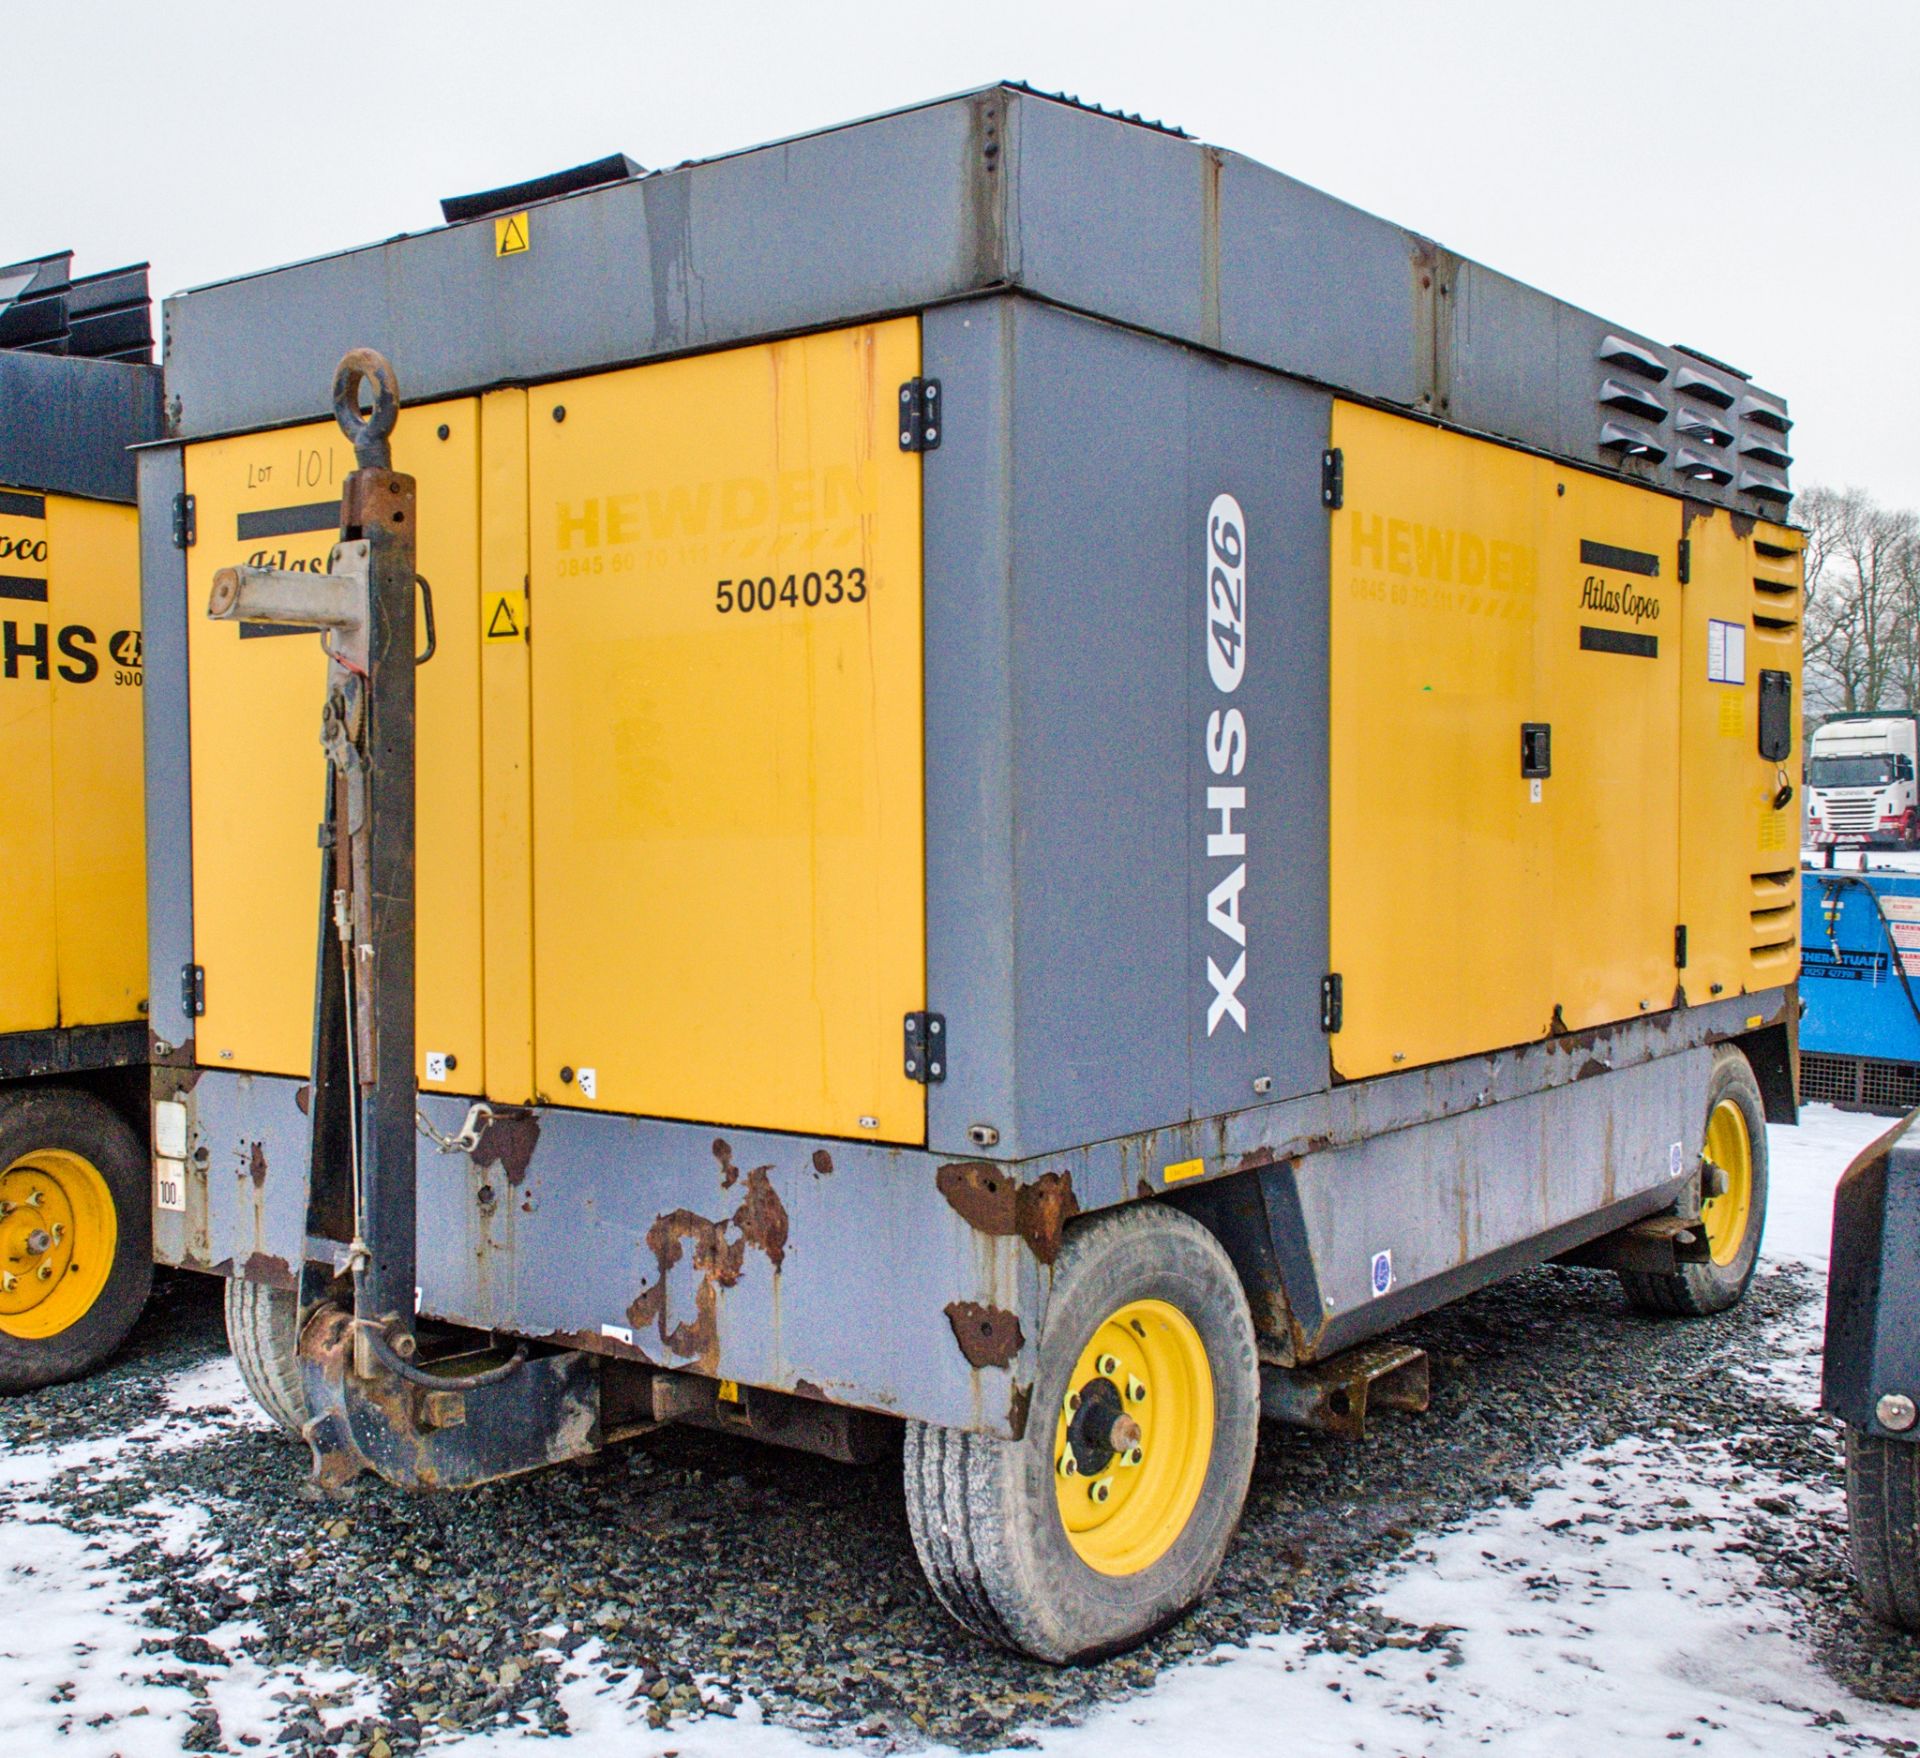 Atlas Copco XAHS 426 900 cfm diesel driven air compressor Year: 2008 S/N: 80706799 Recorded Hours: